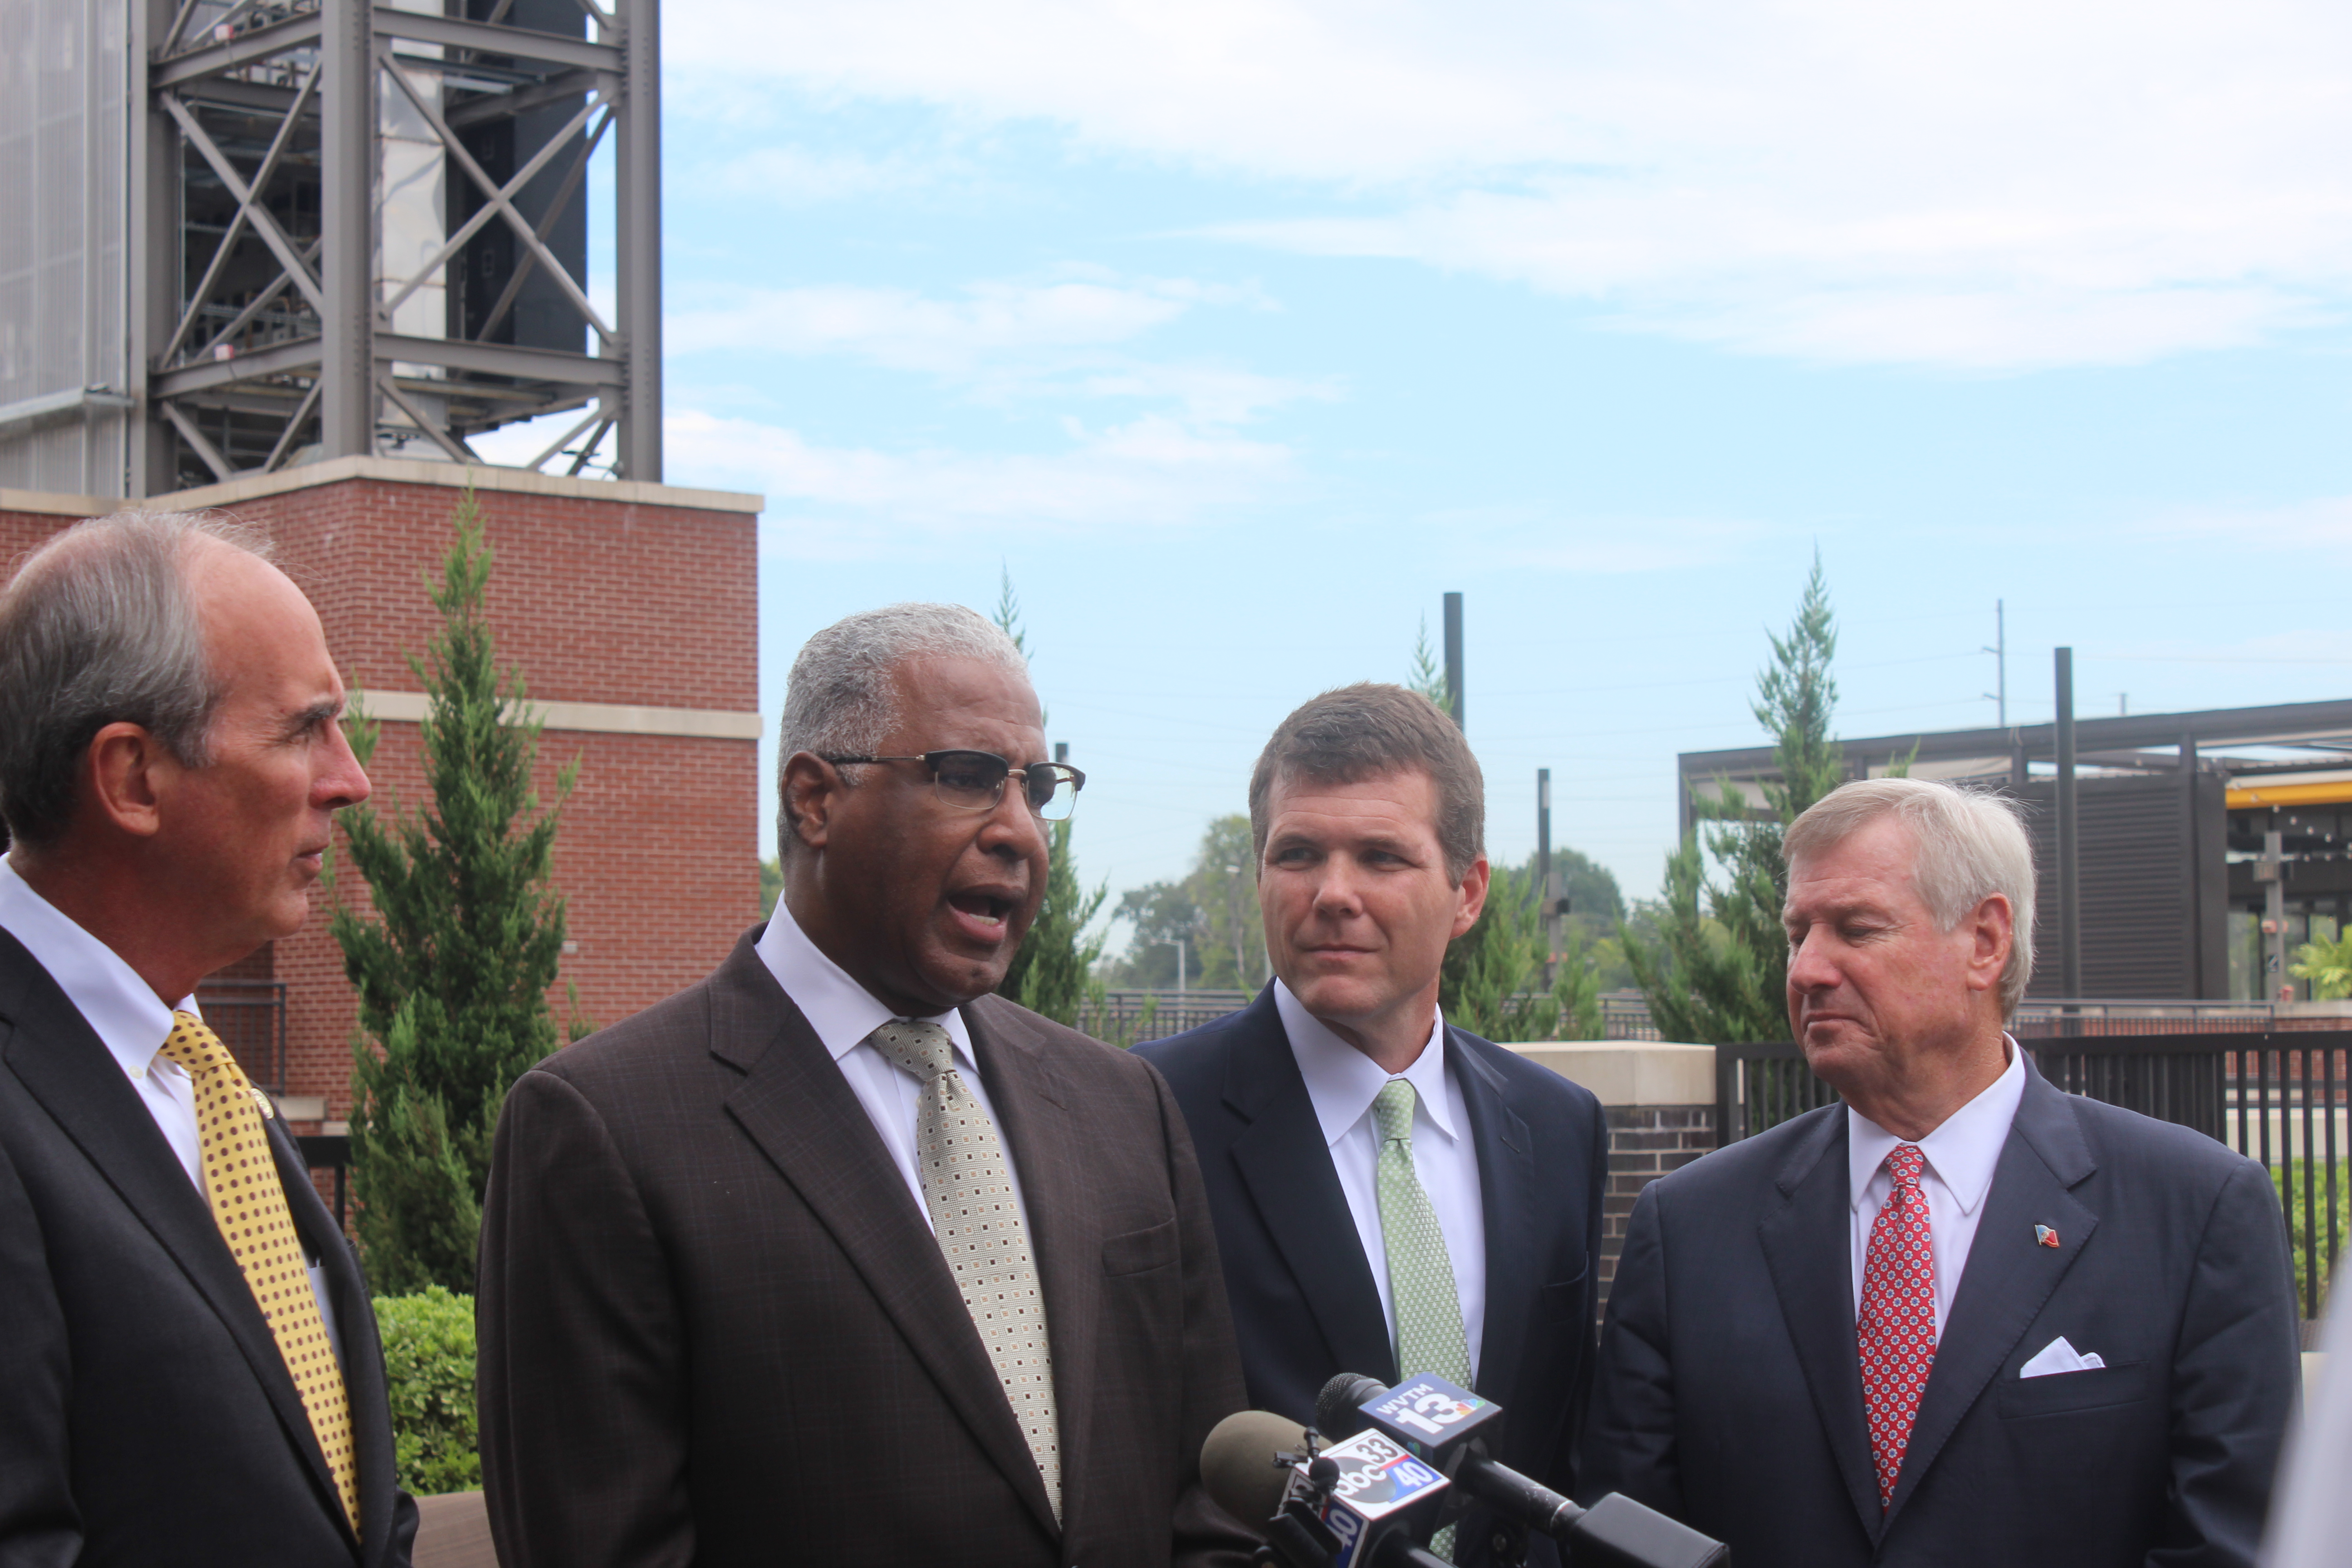 Alabama mayors from left: Sandy Stimpson (Mobile), William Bell (Birmingham), Walter Maddox (Tuscaloosa) and Todd Strange (Montgomery) met in Birmingham on Monday to exchange ideas on how to improve and resolve issues in their cities. (Ariel Worthy, The Birmingham Times)